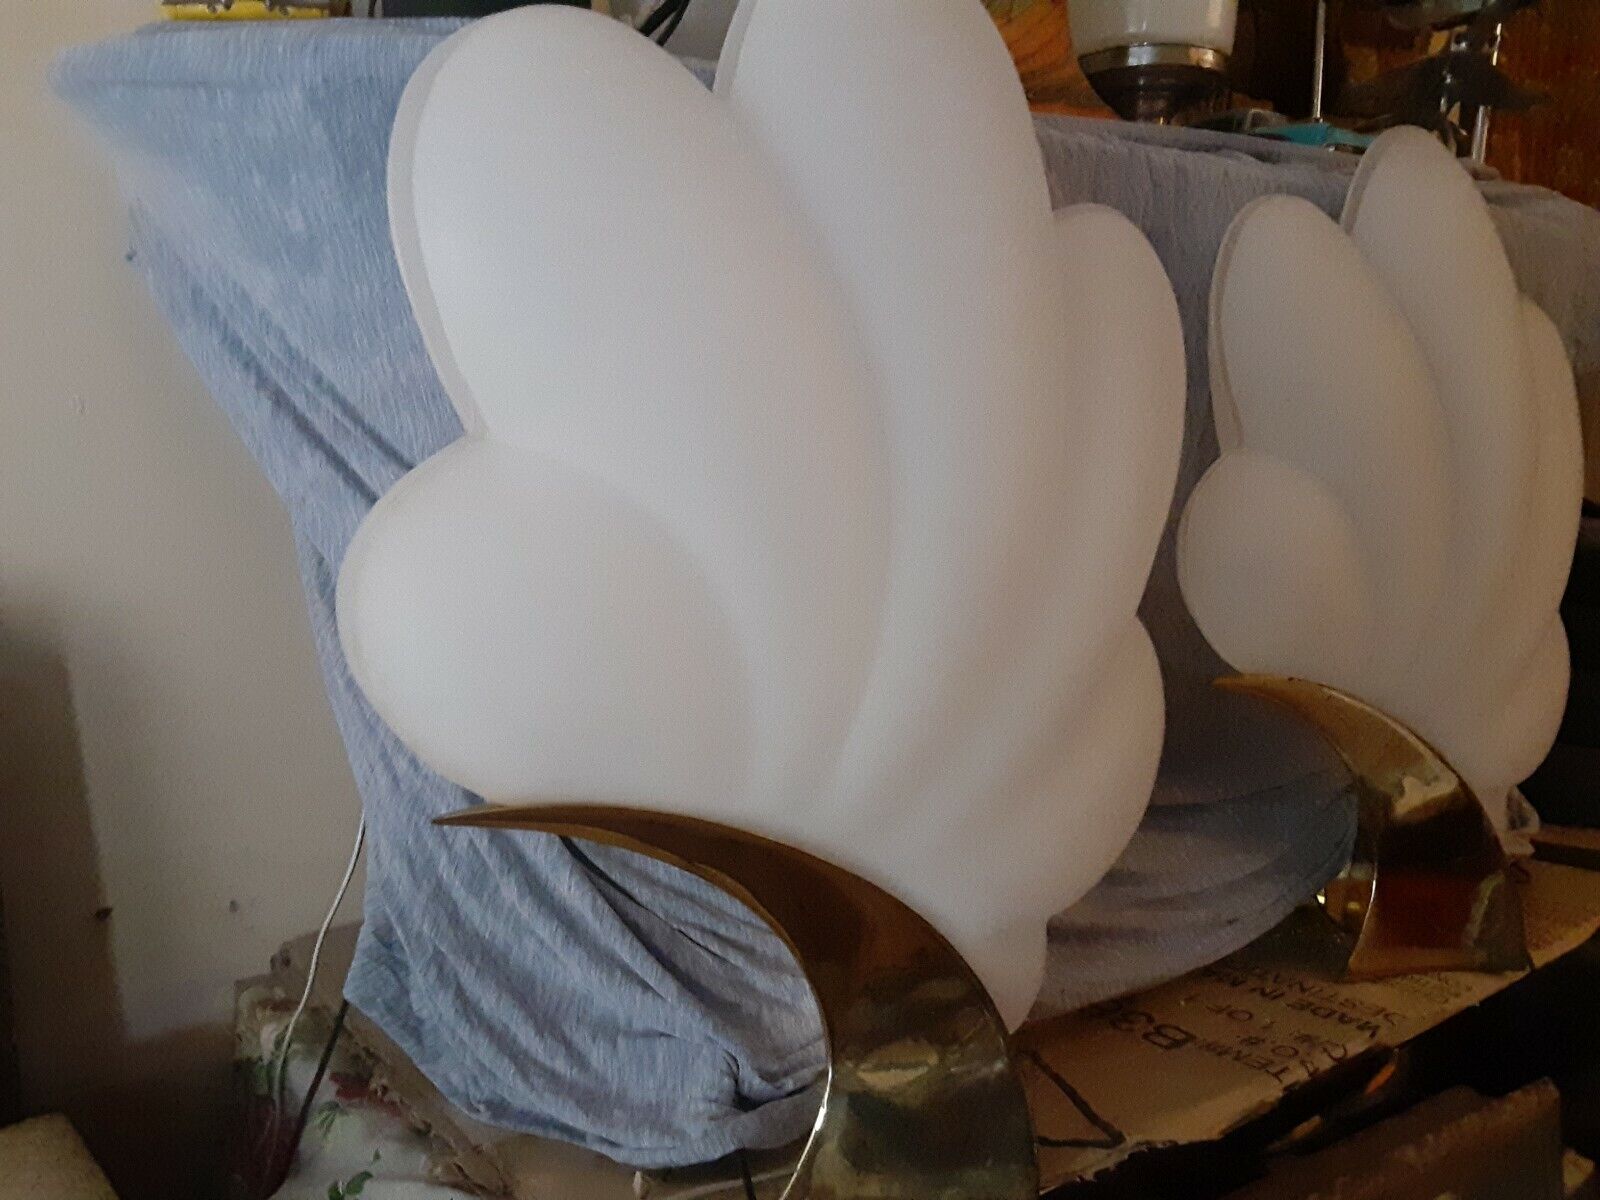 PR MID CENTURY MODERN CANADIAN ROBERT ROUGIER GIANT CLAM SHELL 30X24 TABLE LAMPS